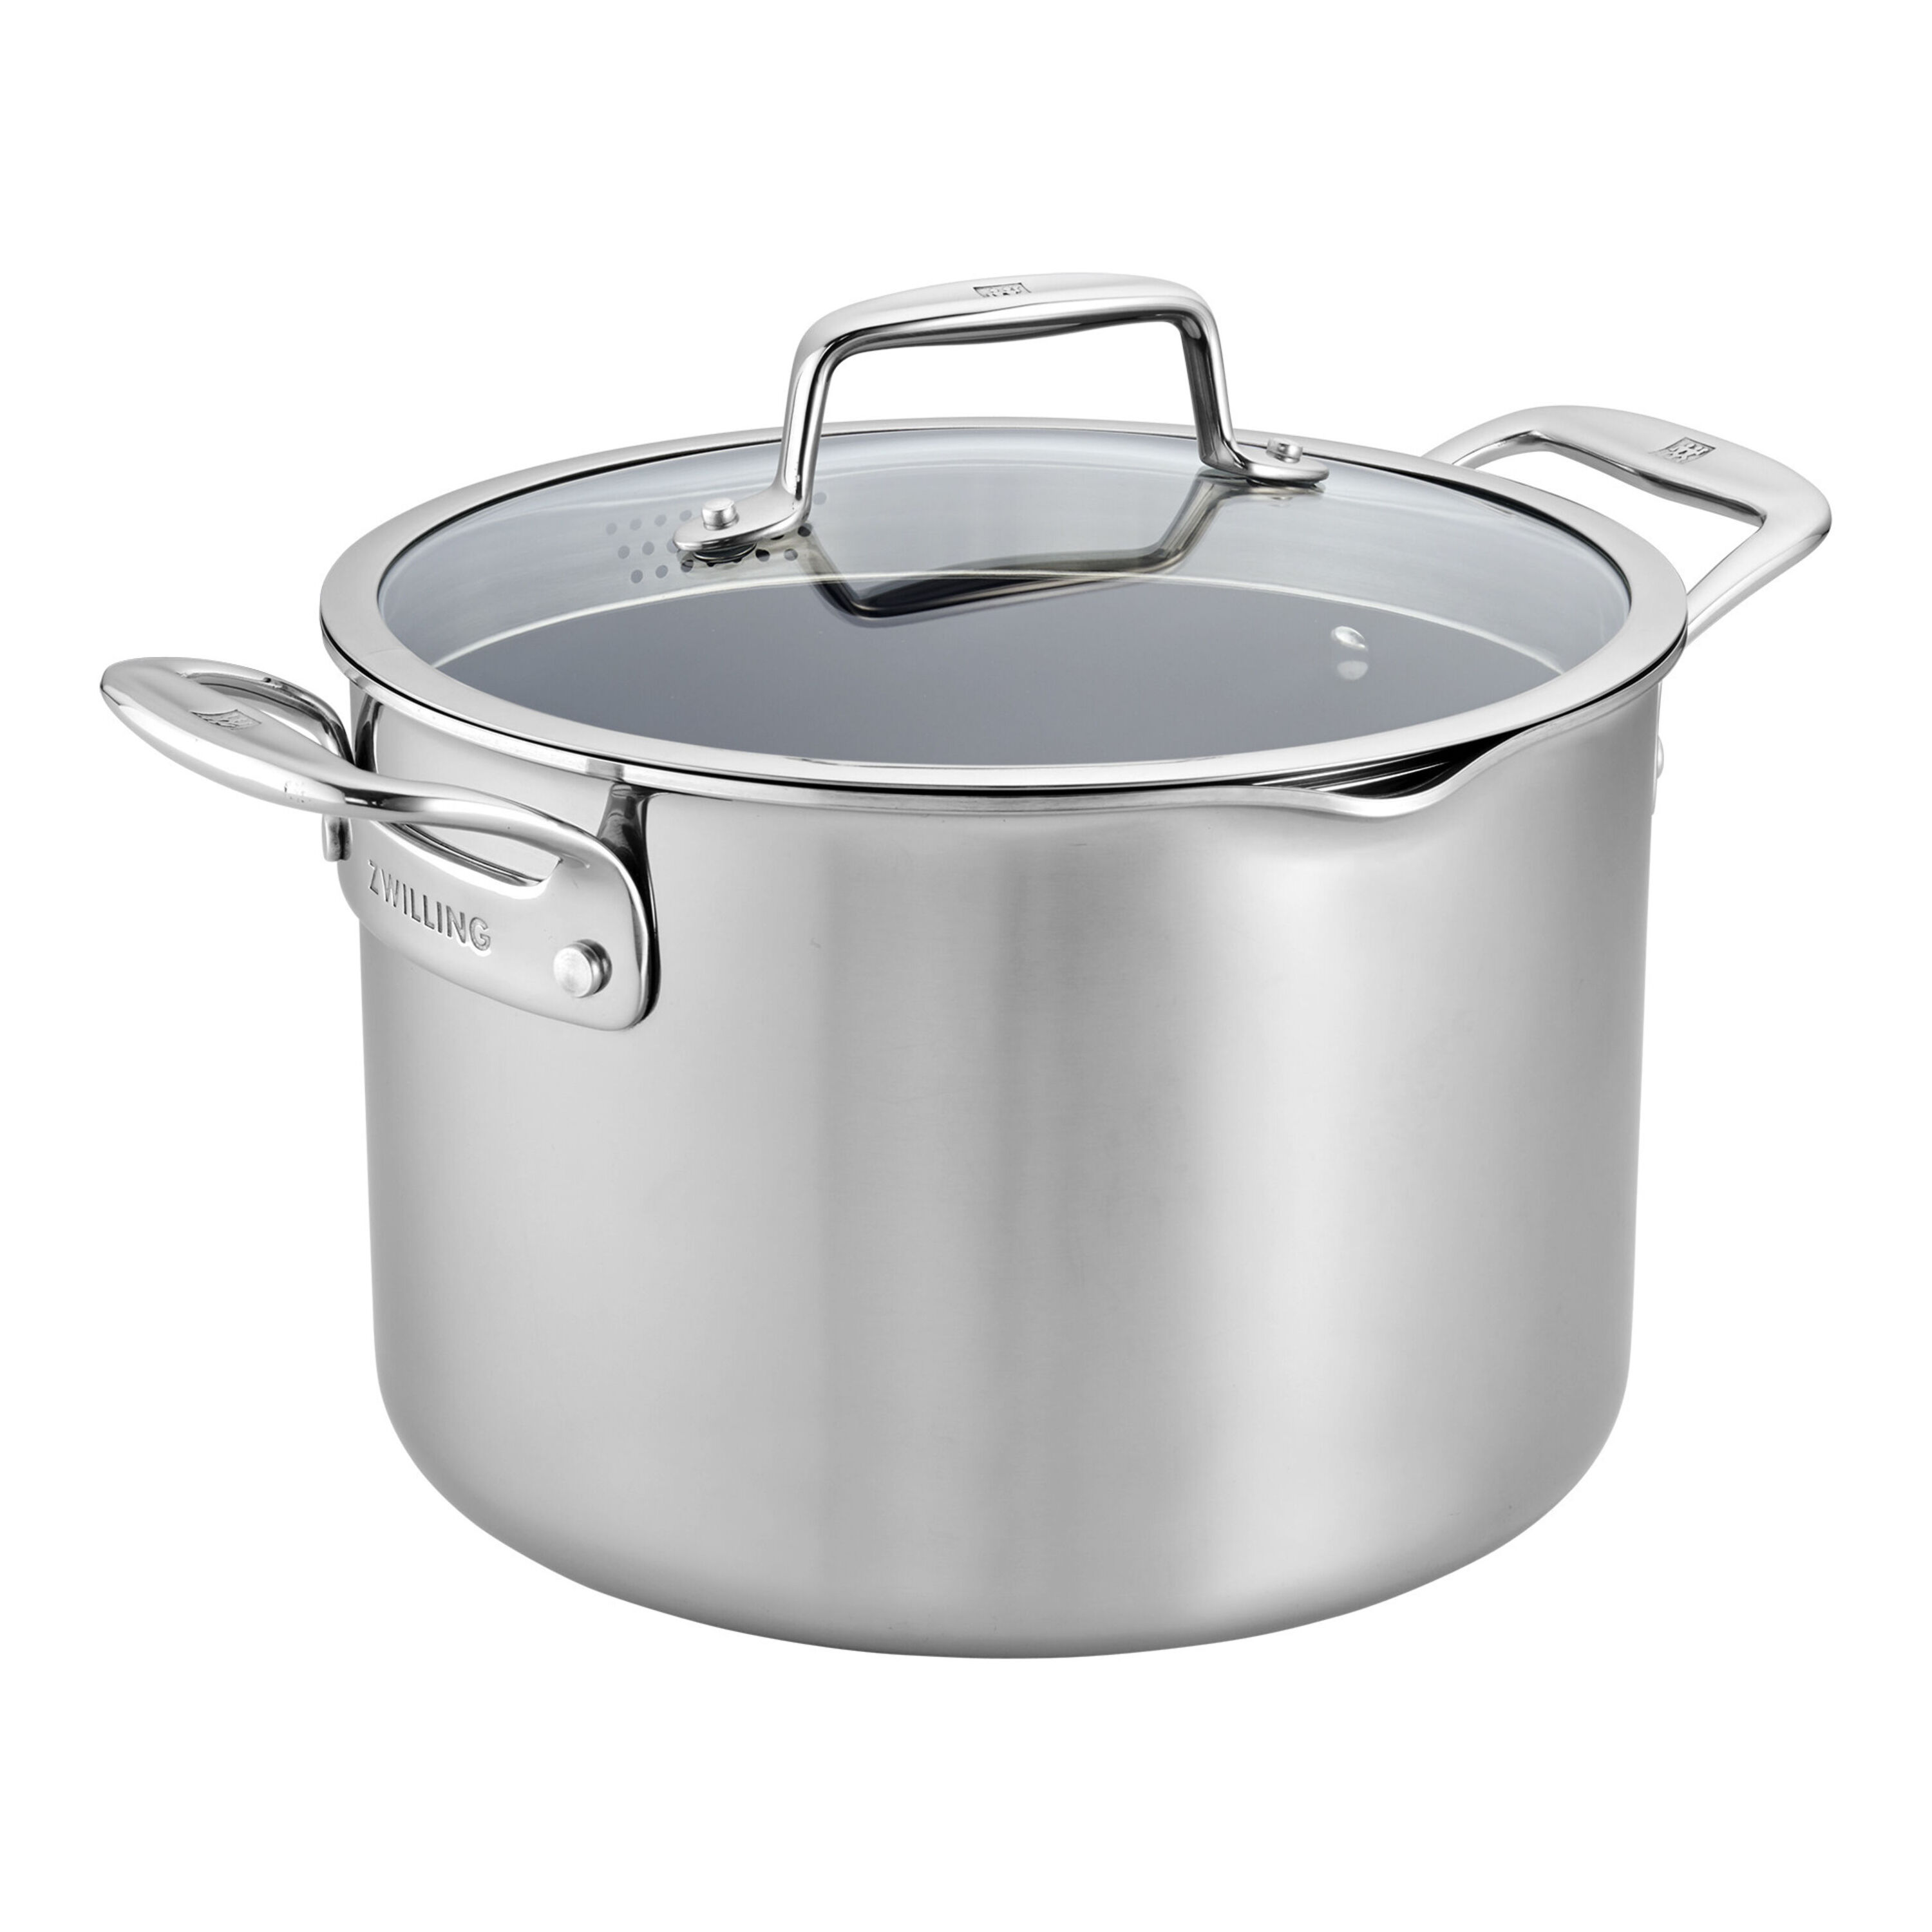 All-Clad Stainless Steel Stockpot with Pasta & Steamer Inserts, 8 qt.